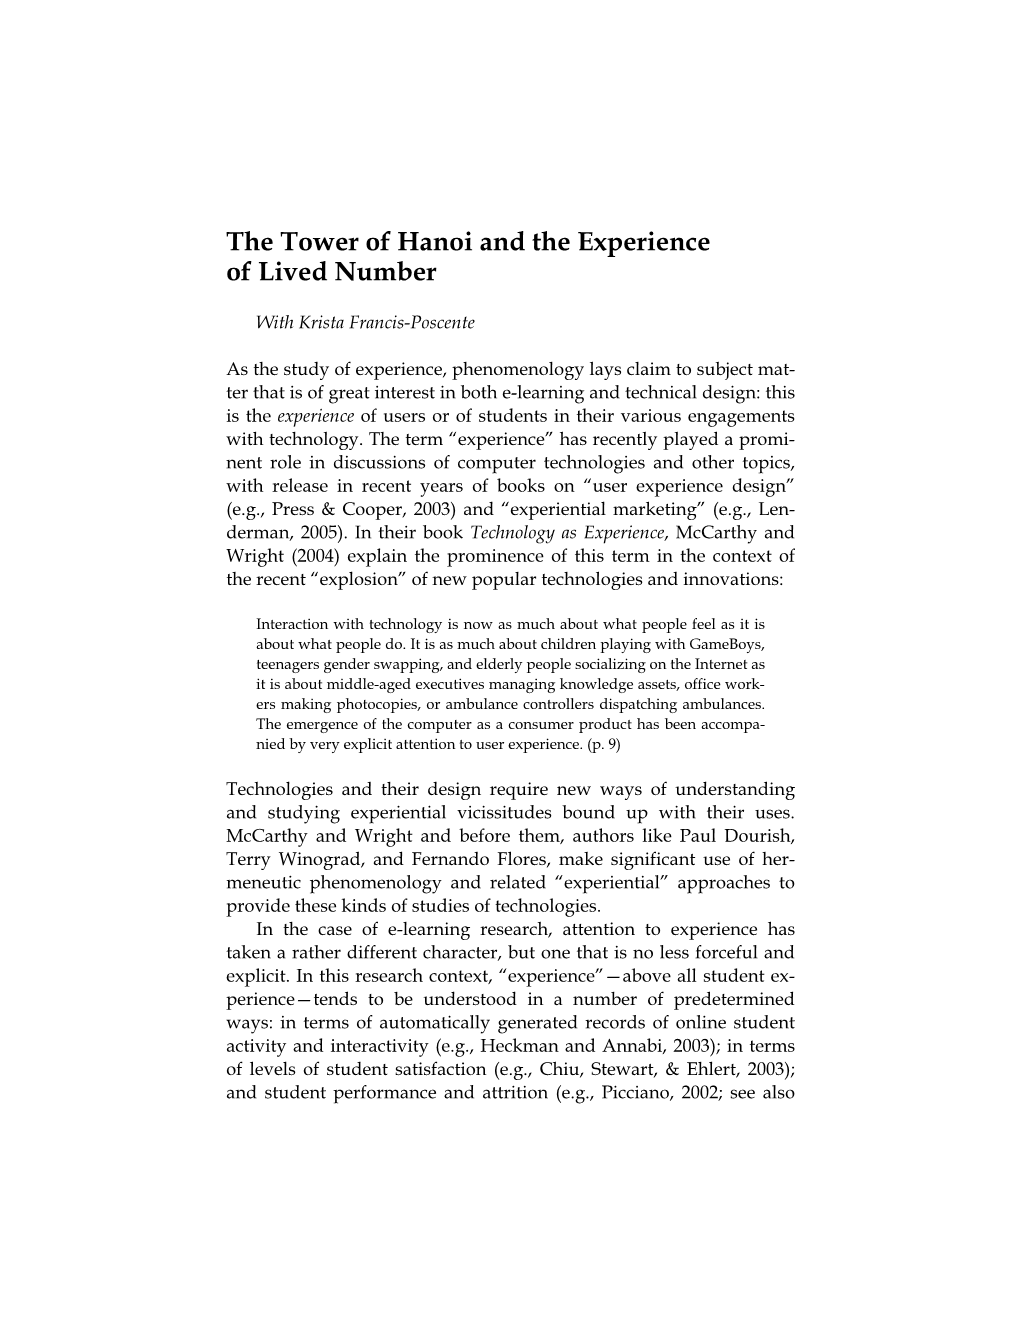 The Tower of Hanoi and the Experience of Lived Number